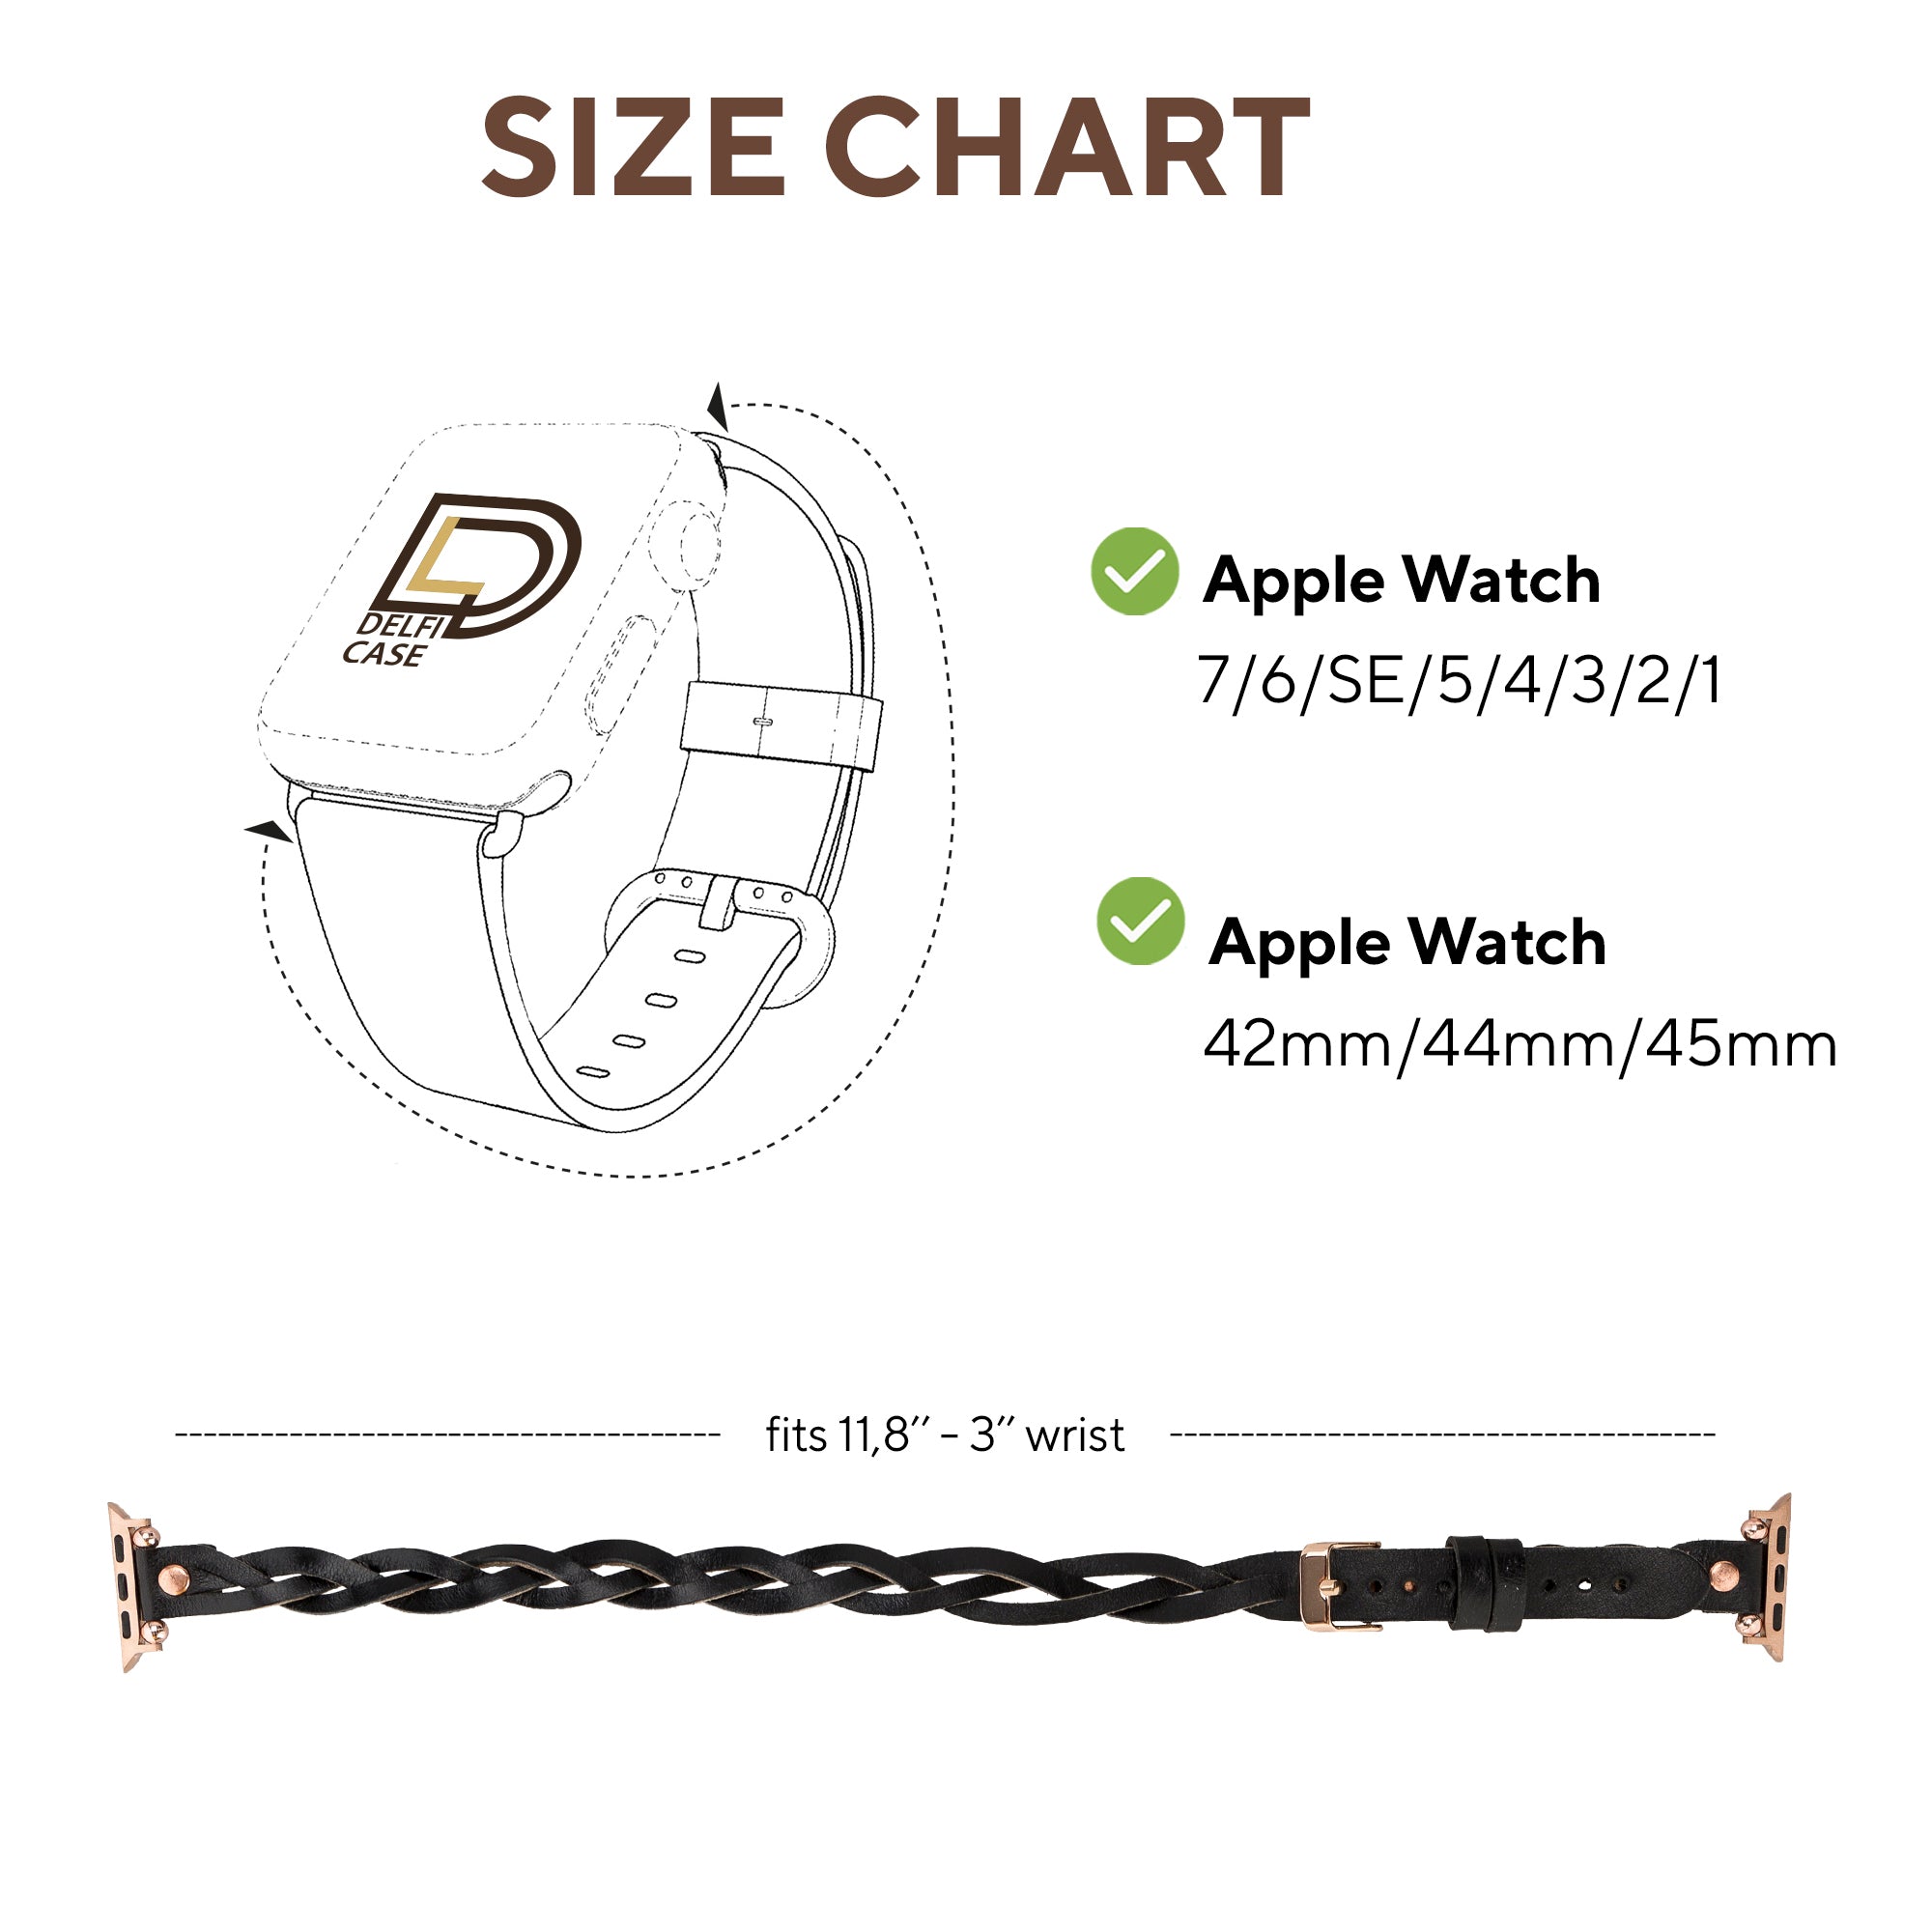 DelfiCase Sheffield Double Tour Watch Band for Apple Watch & Fitbit/Sense 96